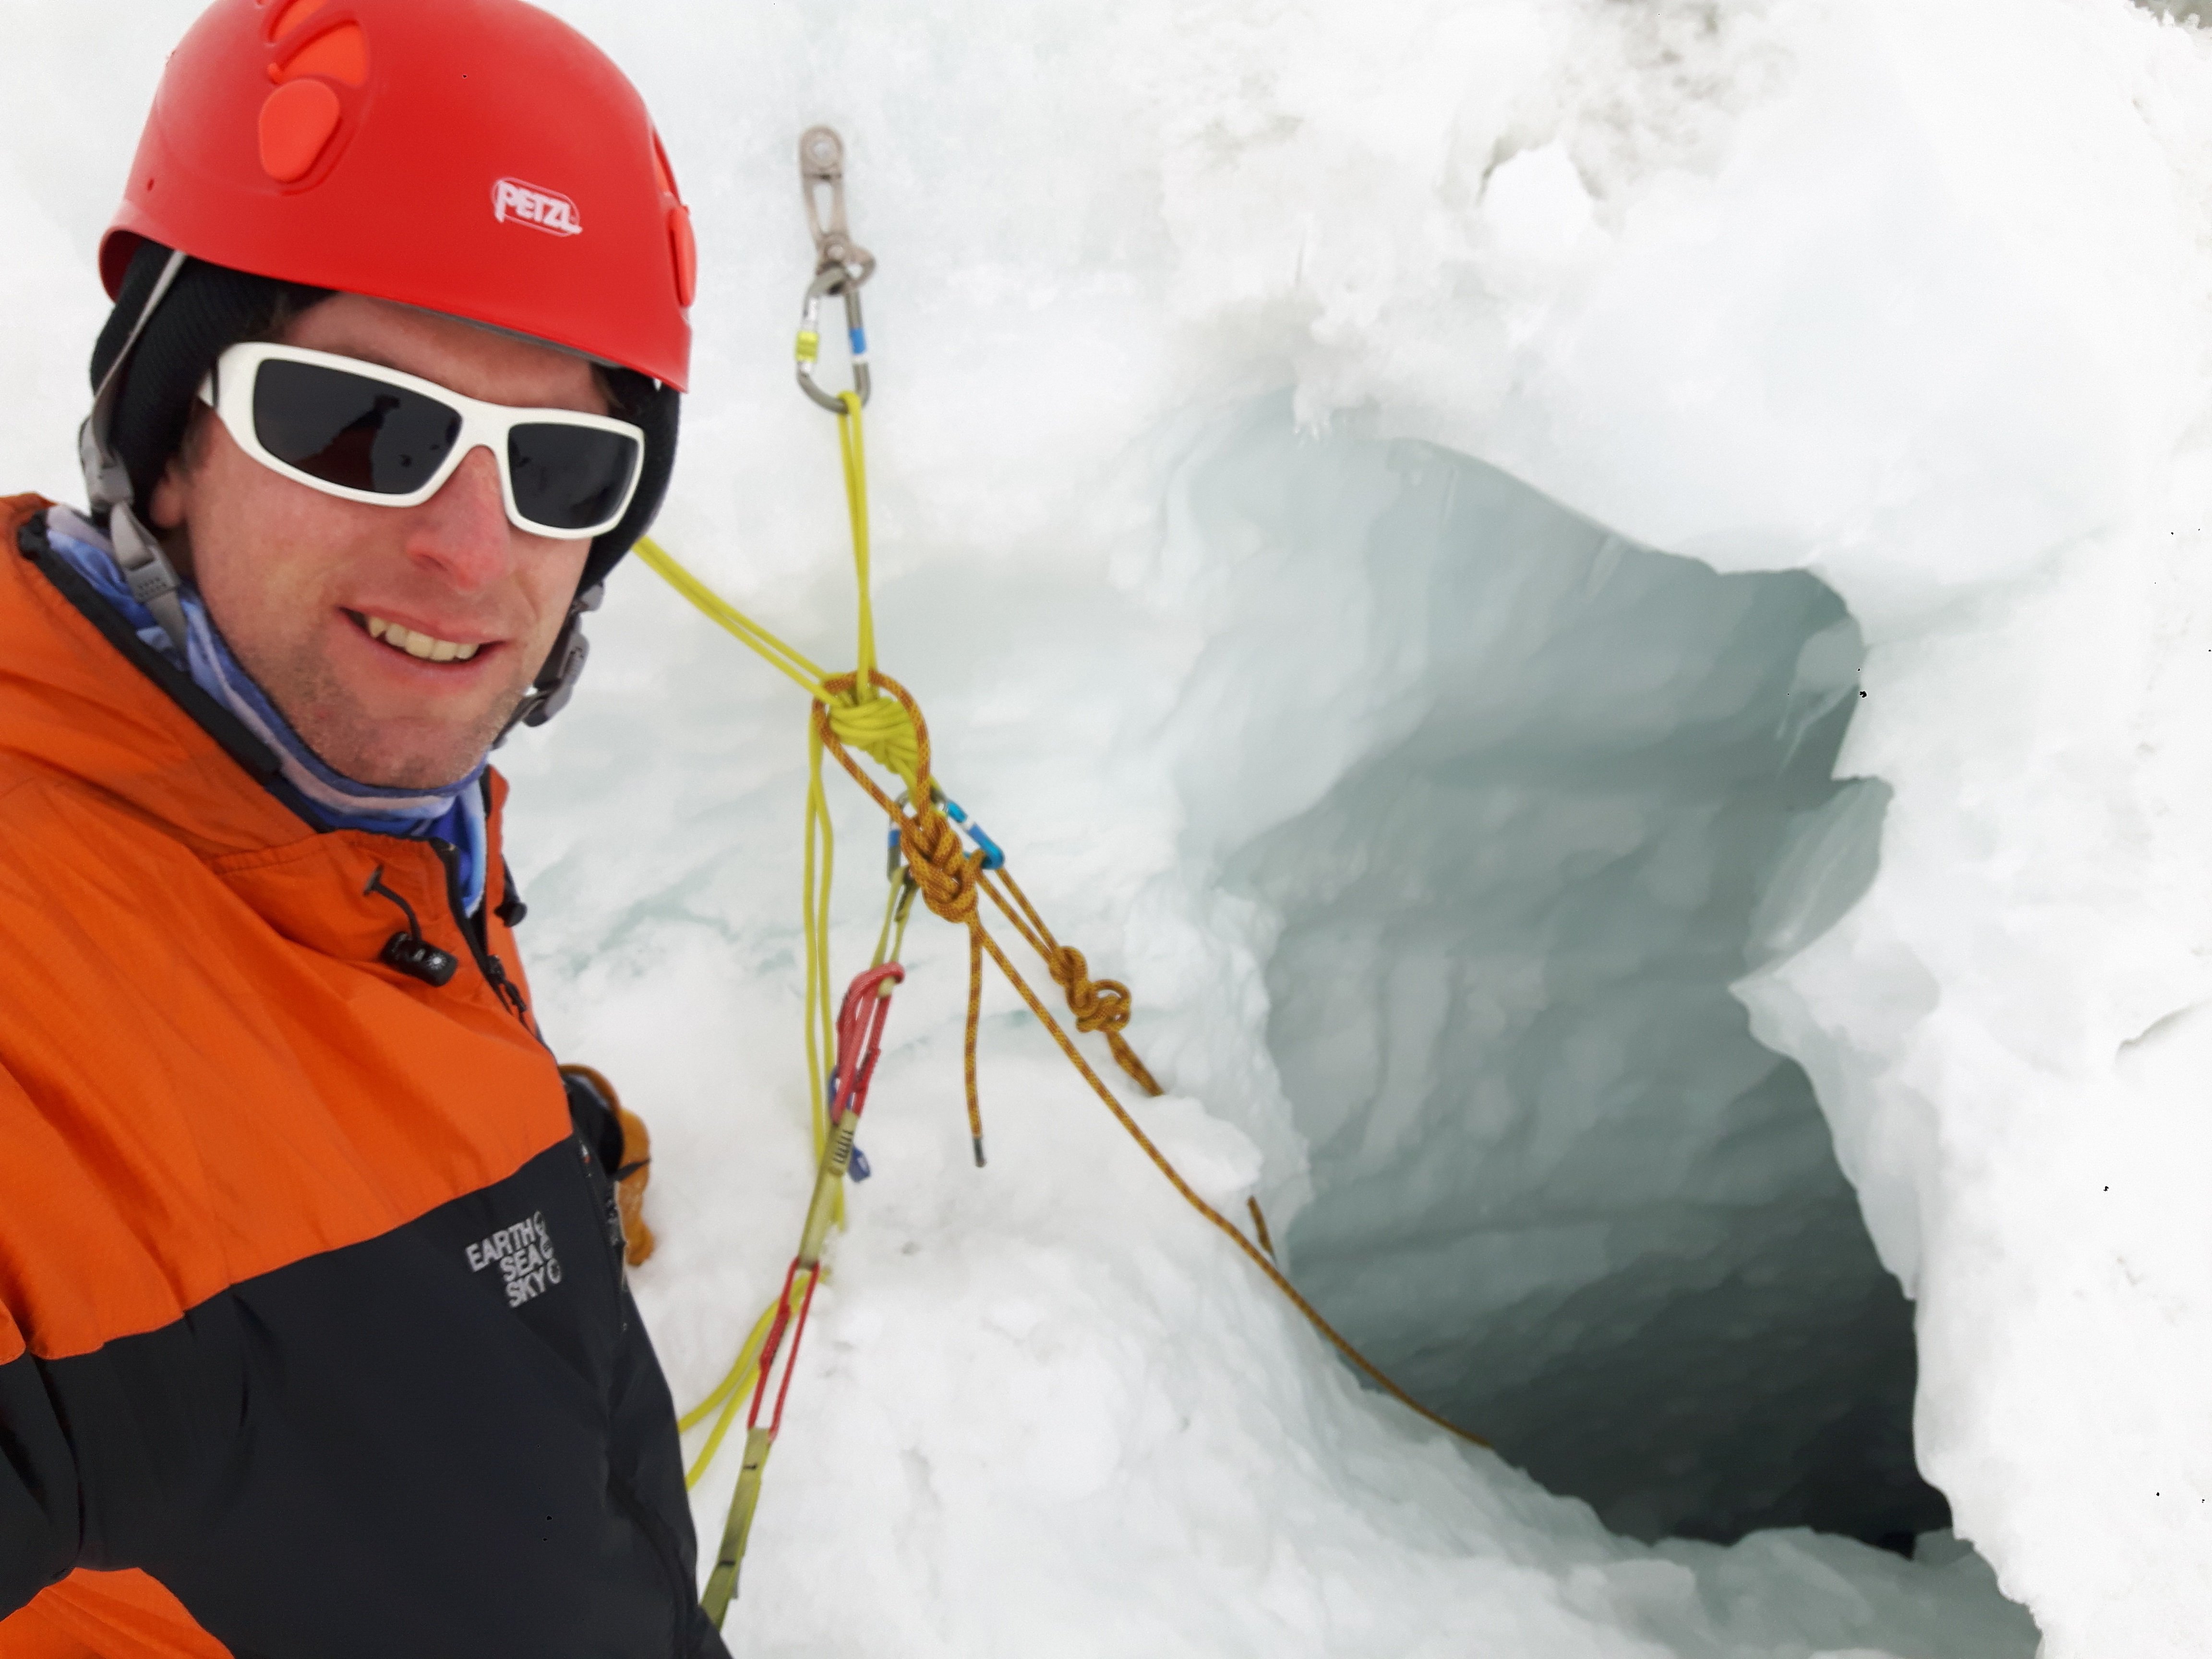 Chris Long during a crevasse rescue drill in the Antarctic. Photo: Supplied